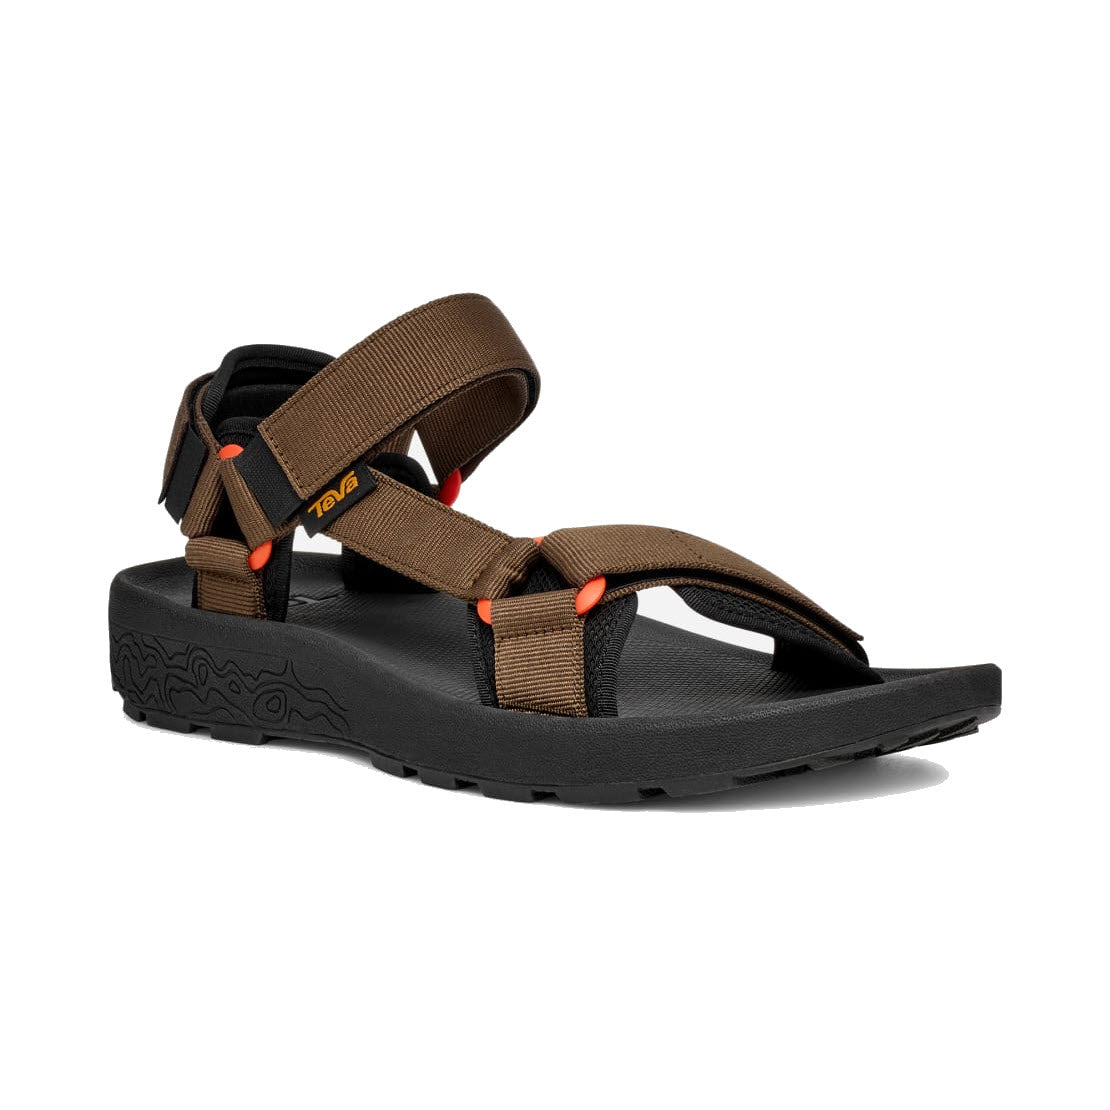 Teva Terragrip Sandal featuring adjustable straps and a rugged sole, shown against a white background.